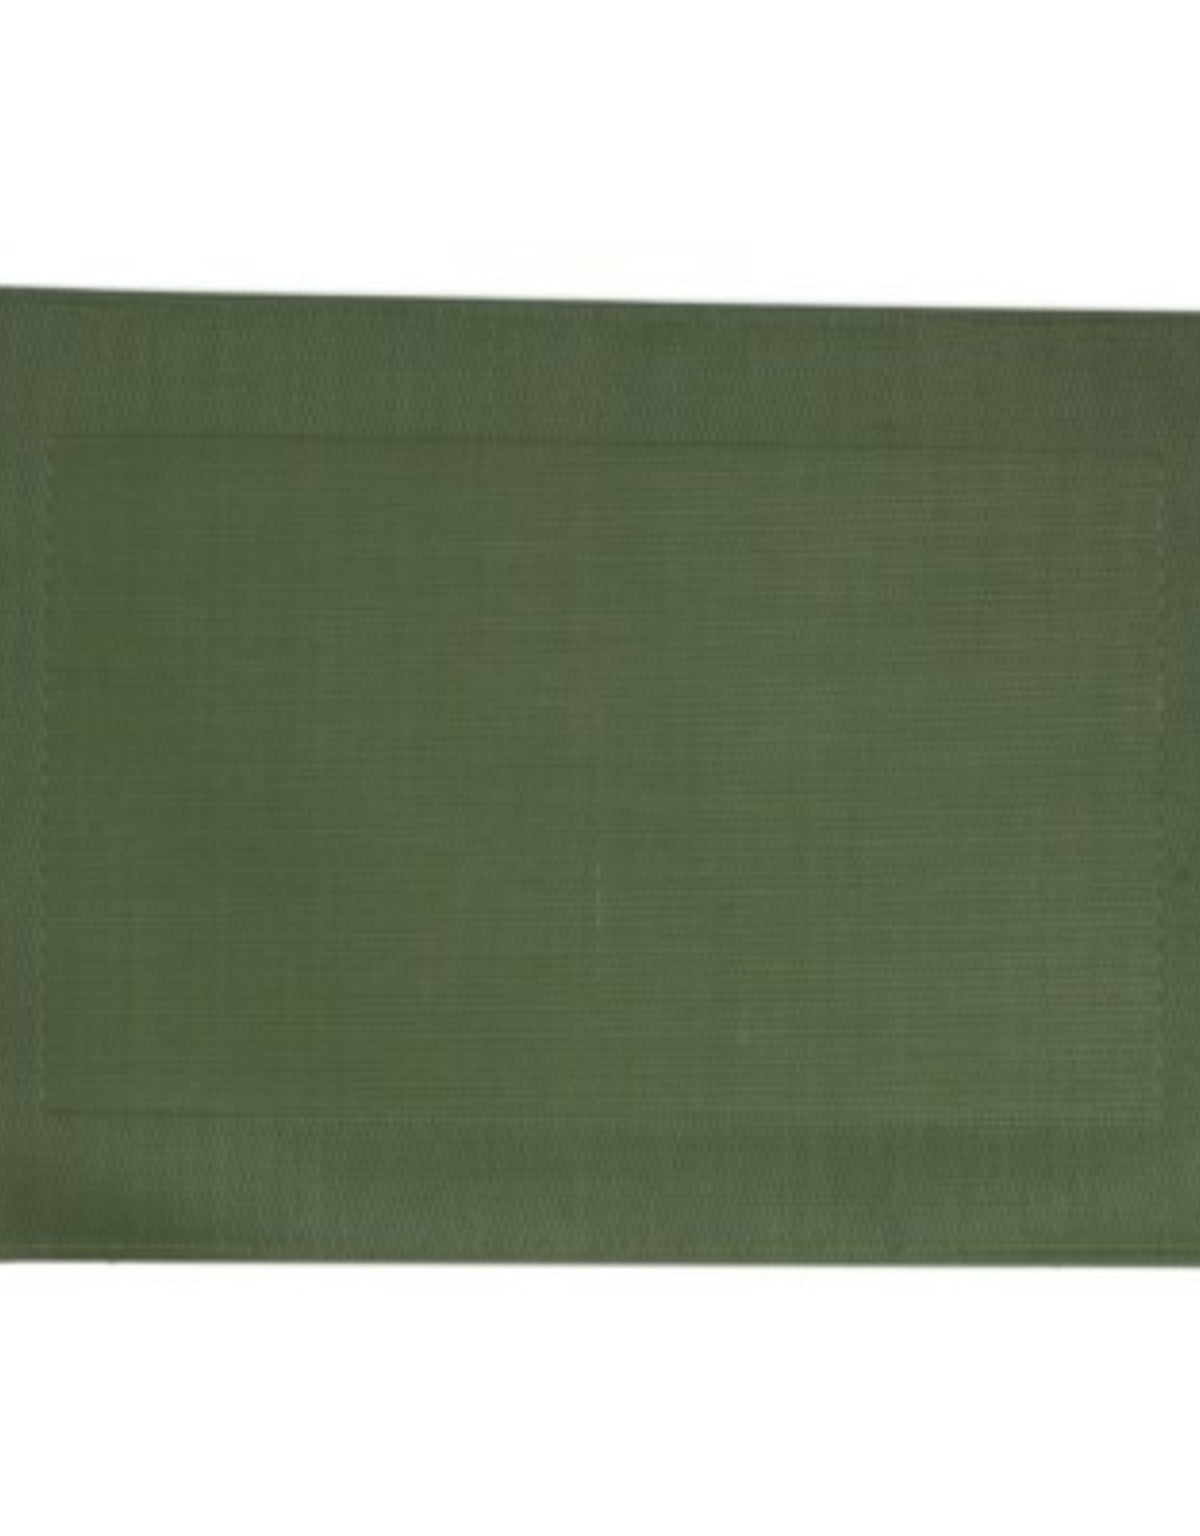 OUTDOOR ACCESSORIES Bordered VNYL Placemat Moss